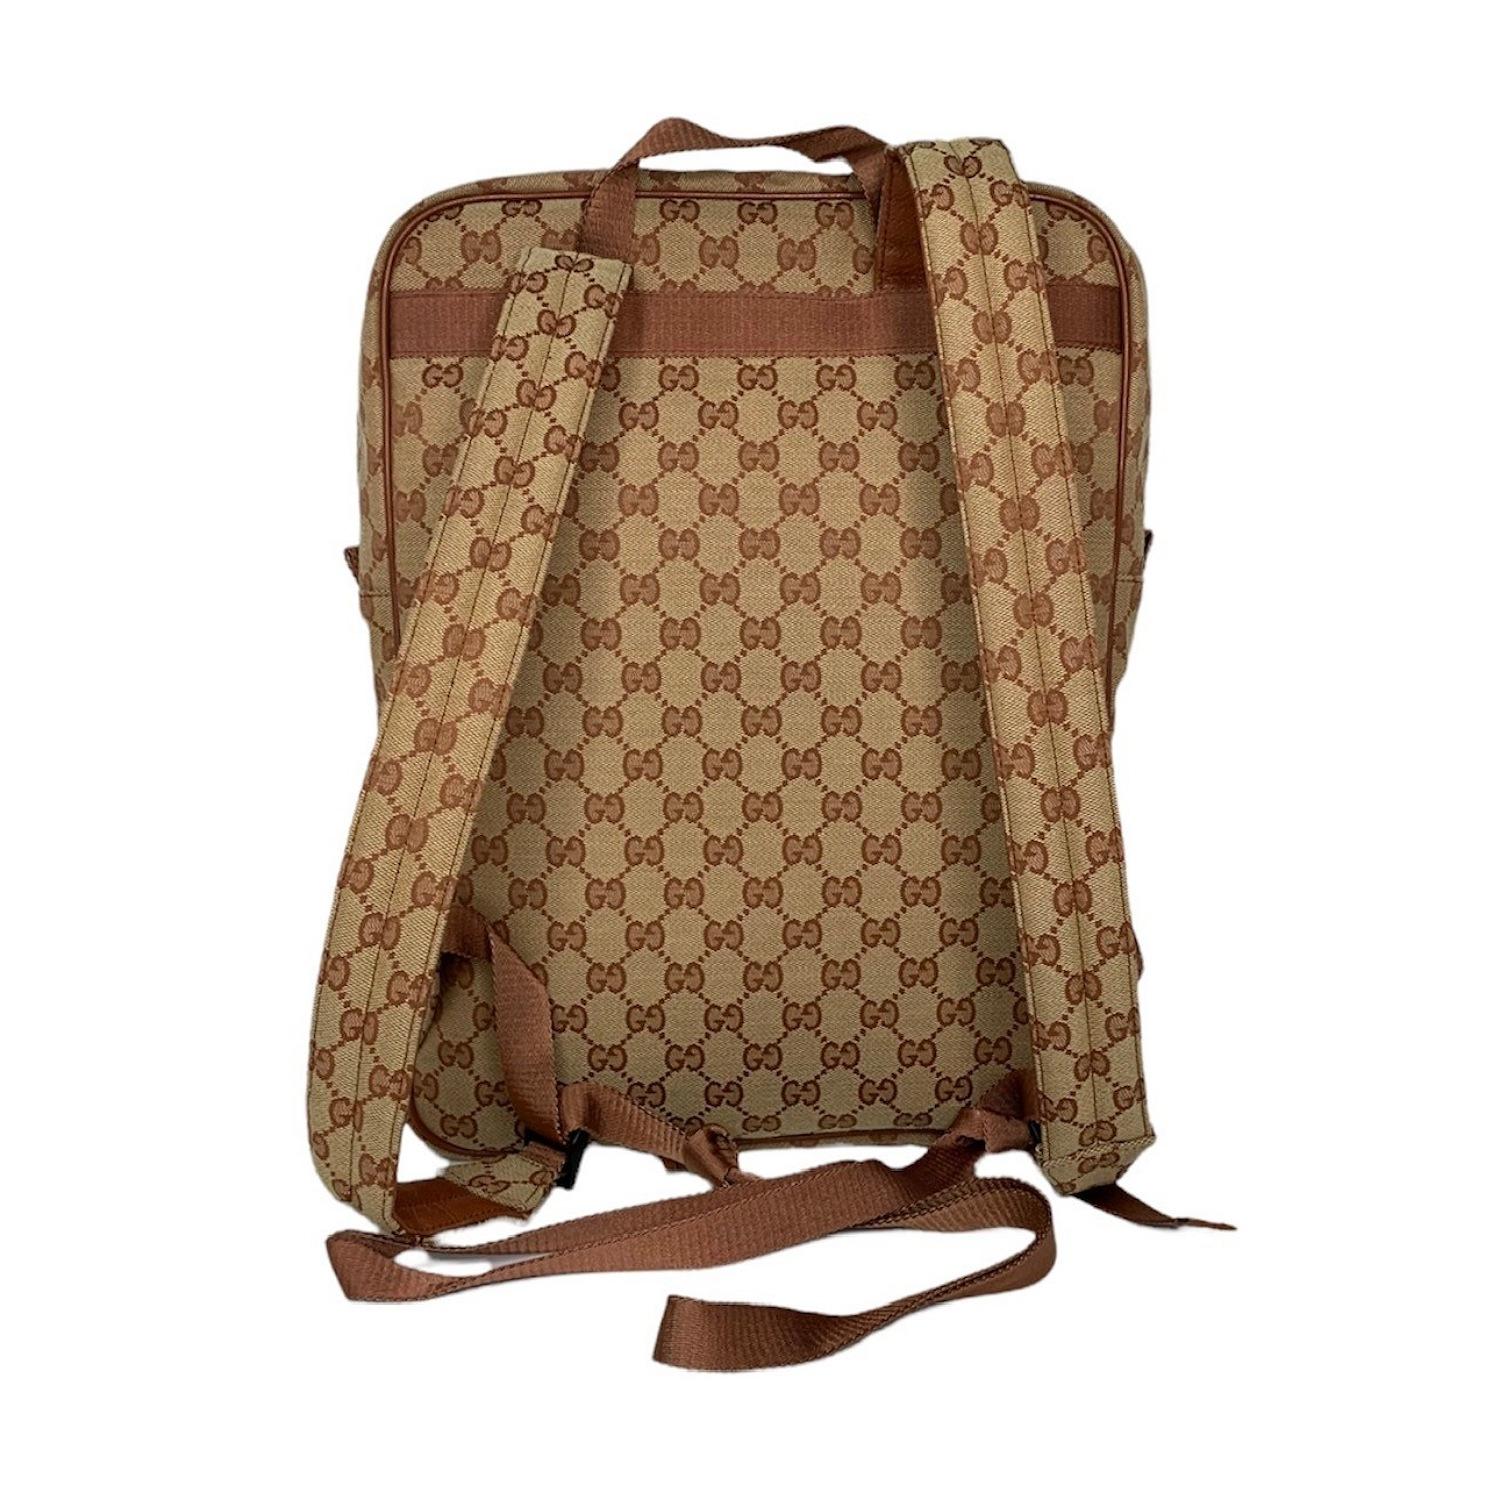 A limited edition collectible from Gucci, the Original GG canvas gets a sporty update with white New York Yankees logo embroidery, trimmed with rust orange leather and finished with antiqued silver-tone hardware. The padded backpack straps are